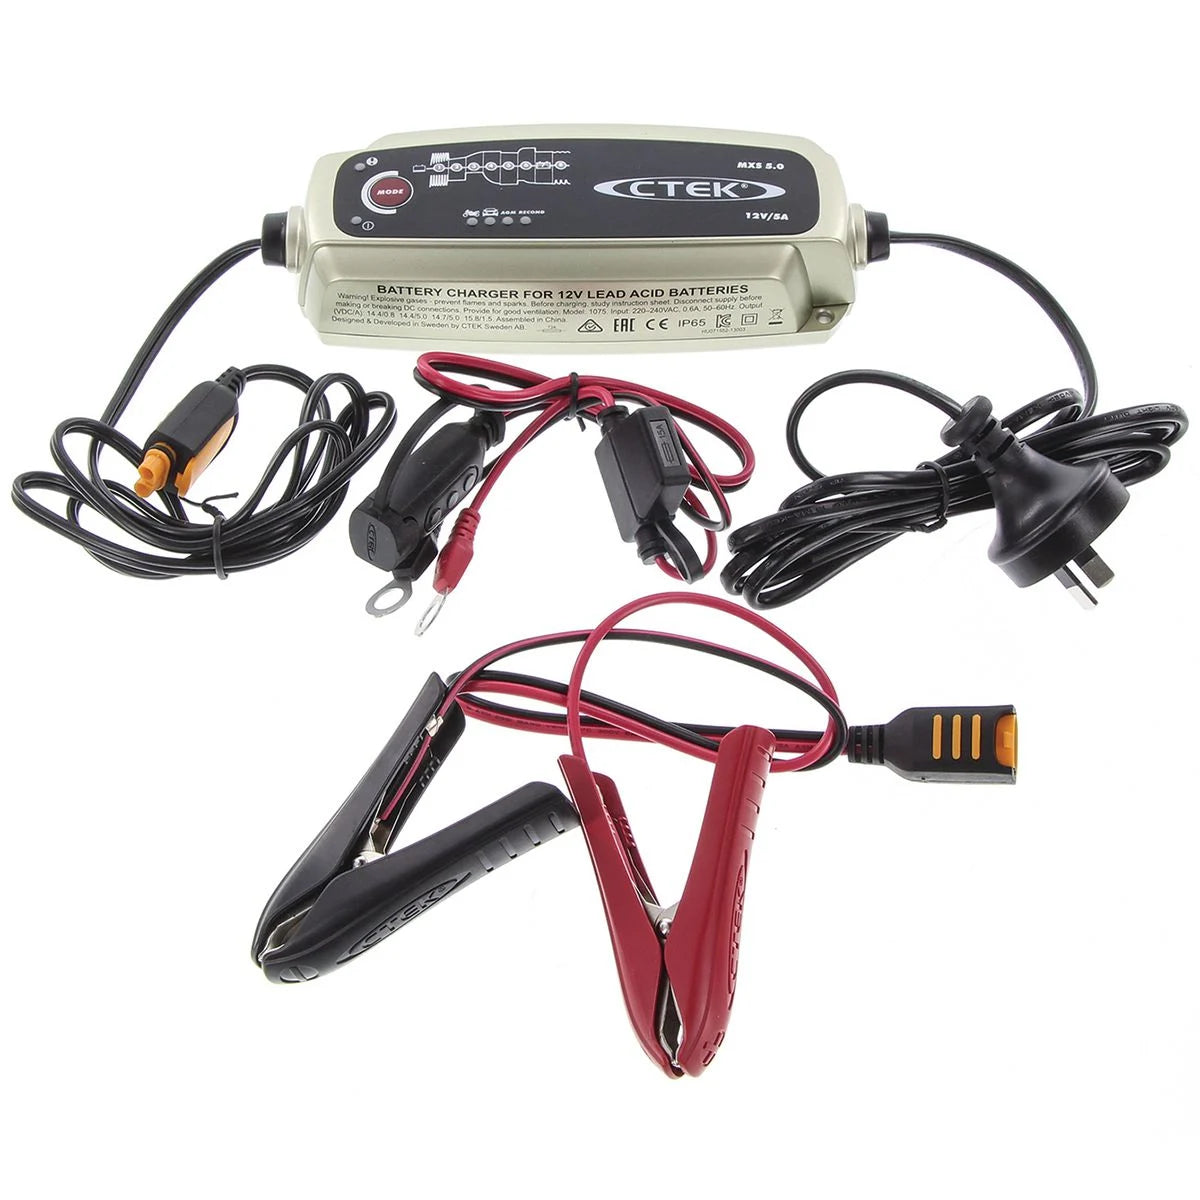 MXS 5.0 Battery Charger / 12 V / 5A buy now